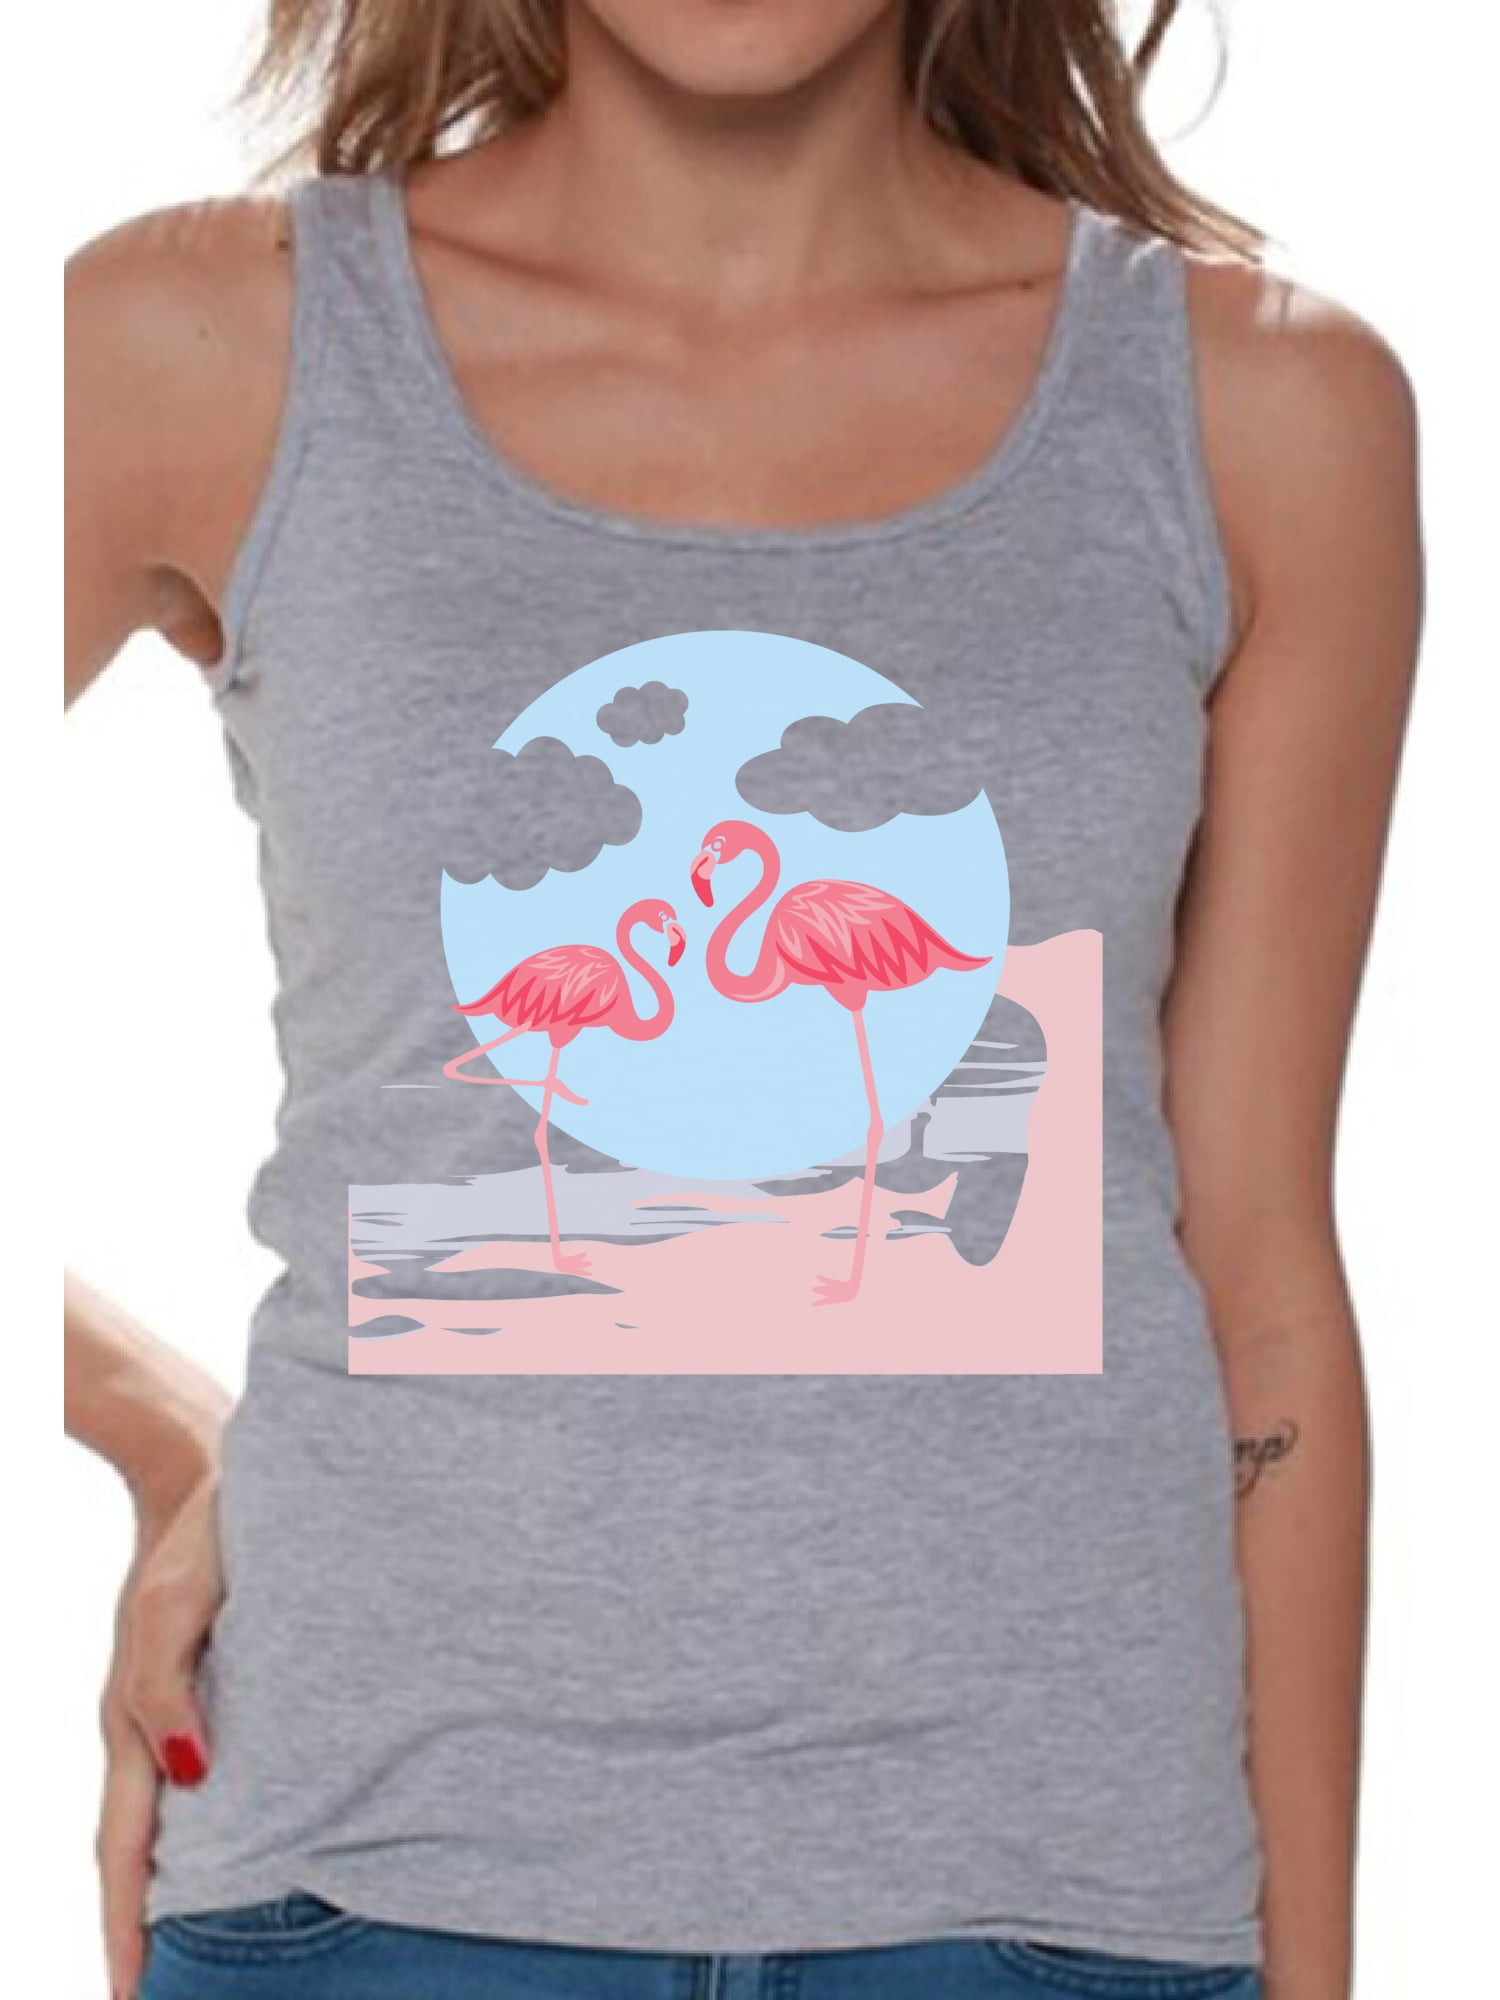 Awkward Styles - Awkward Styles Two Flamingos Tank Top T-Shirt for Her ...